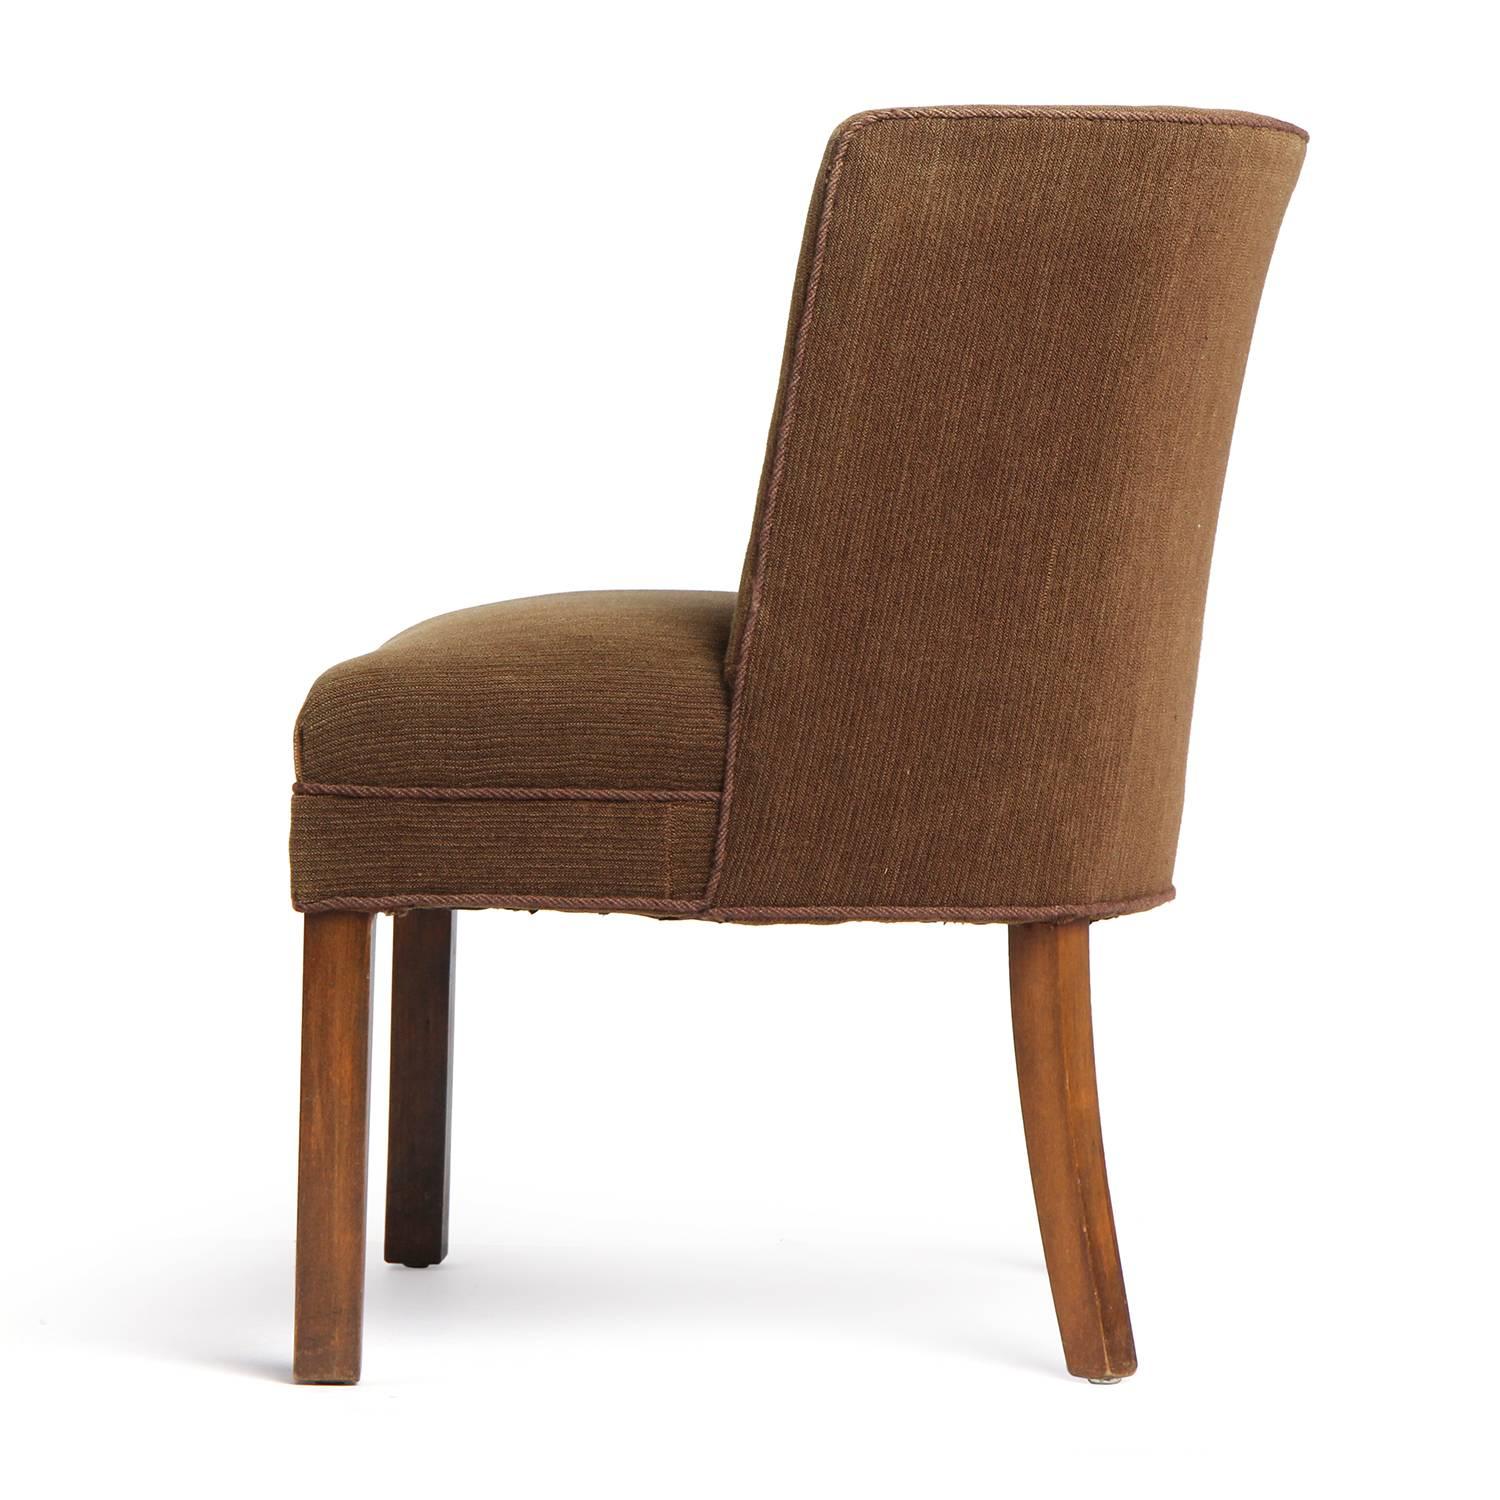 A stately and well proportioned armless upholstered side chair having a curved back, floating on substantial squared walnut legs.